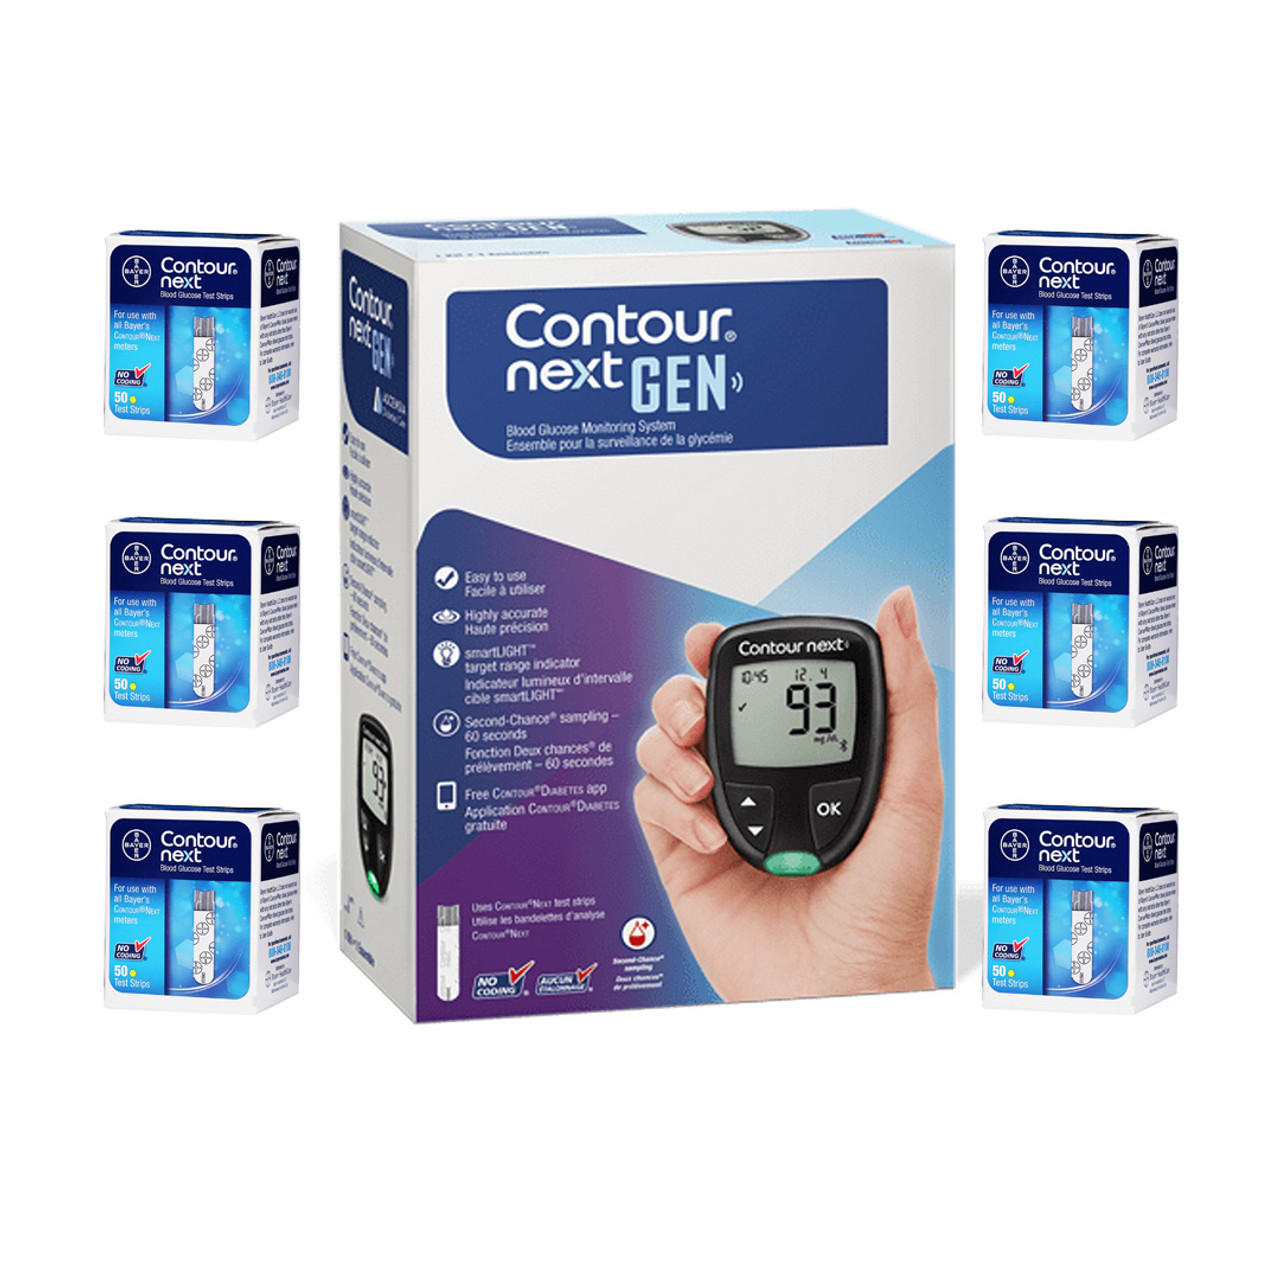 Ascensia Bayer Contour Next One Meter Only for Glucose Care